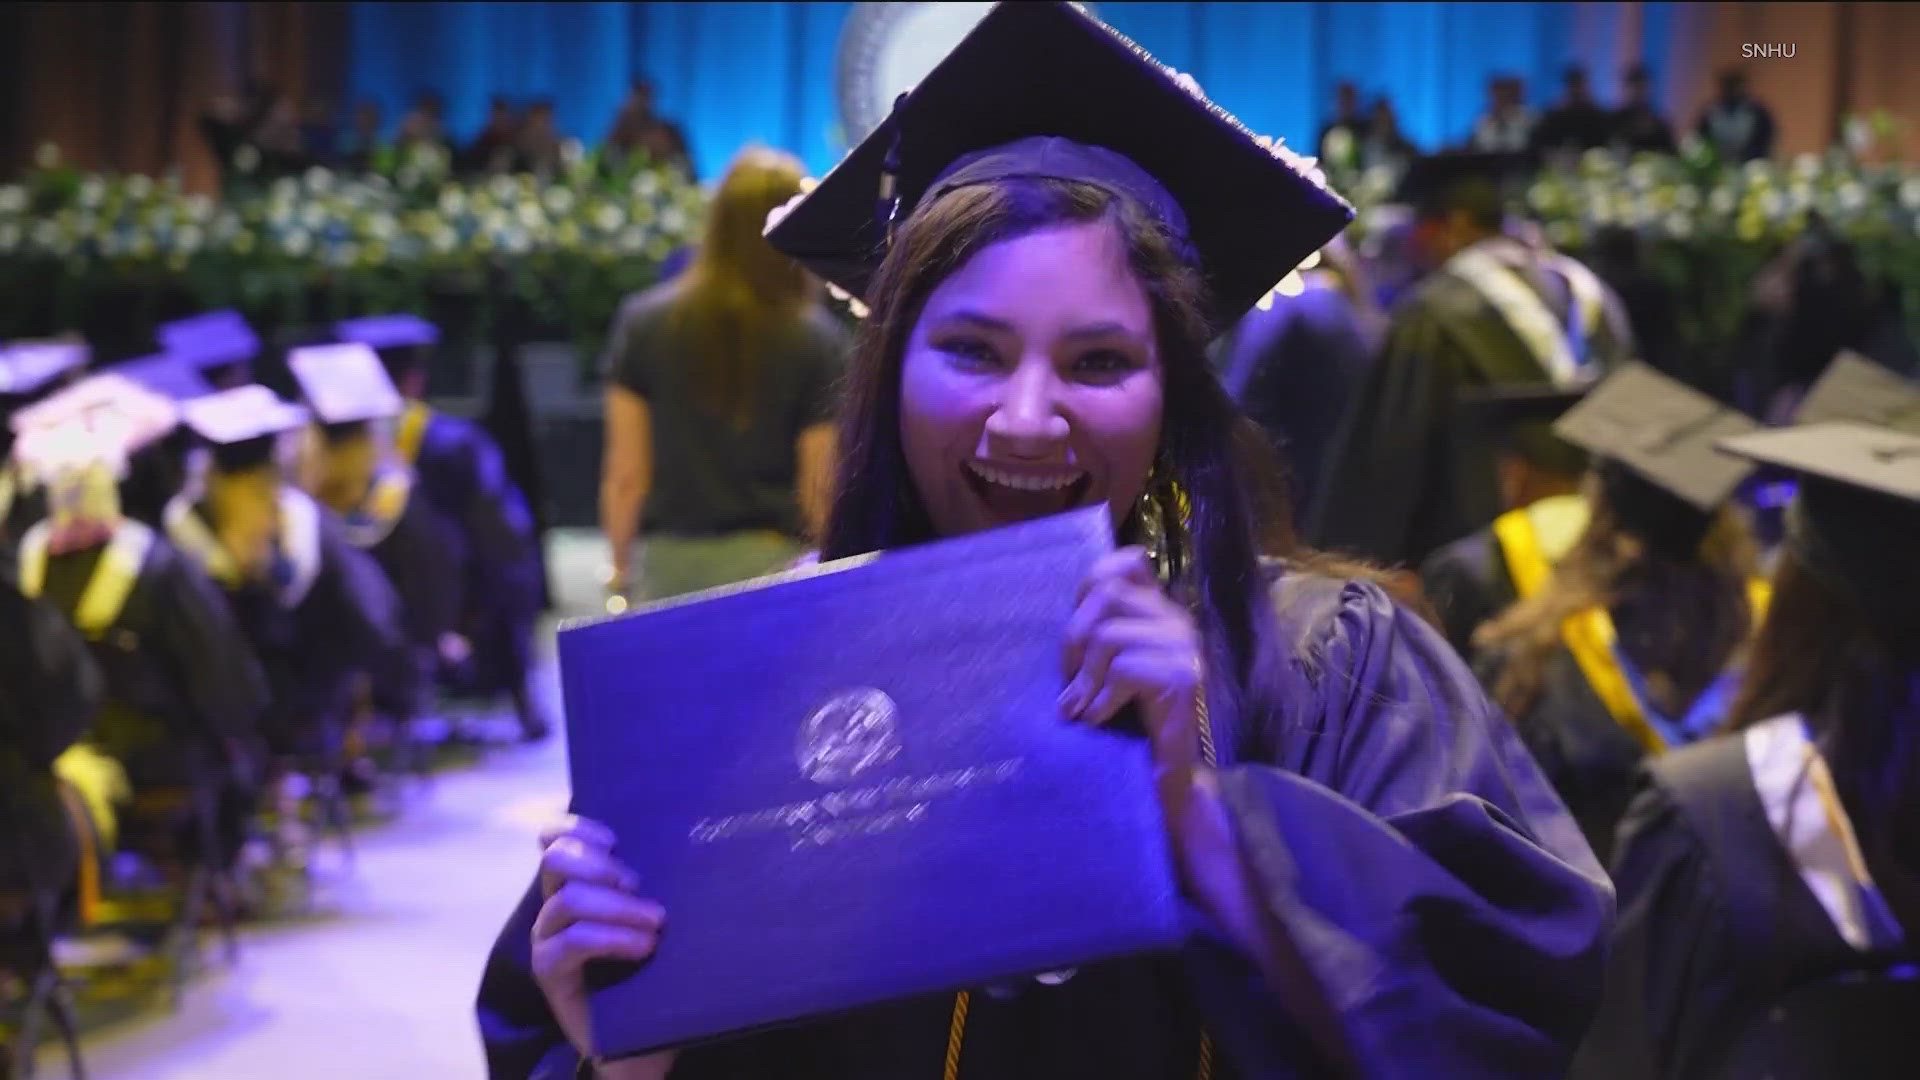 Taylor, Texas mother Savannah Martinez was diagnosed with a spine tumor at just 18-years-old. 6 years later, she was able to walk across the stage.